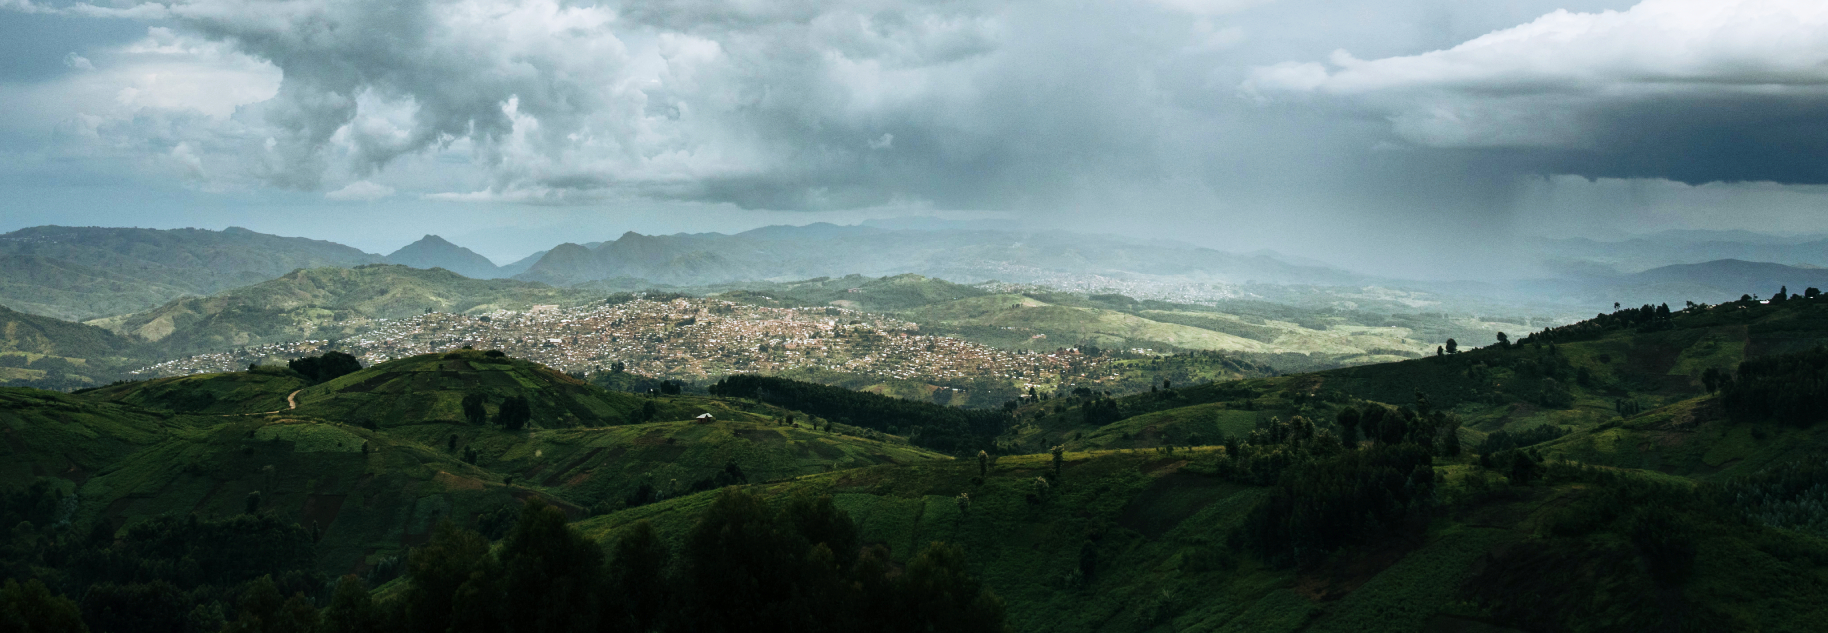 The last hills and villages before the front line between the Congolese army and M23, Lubero territory, North Kivu